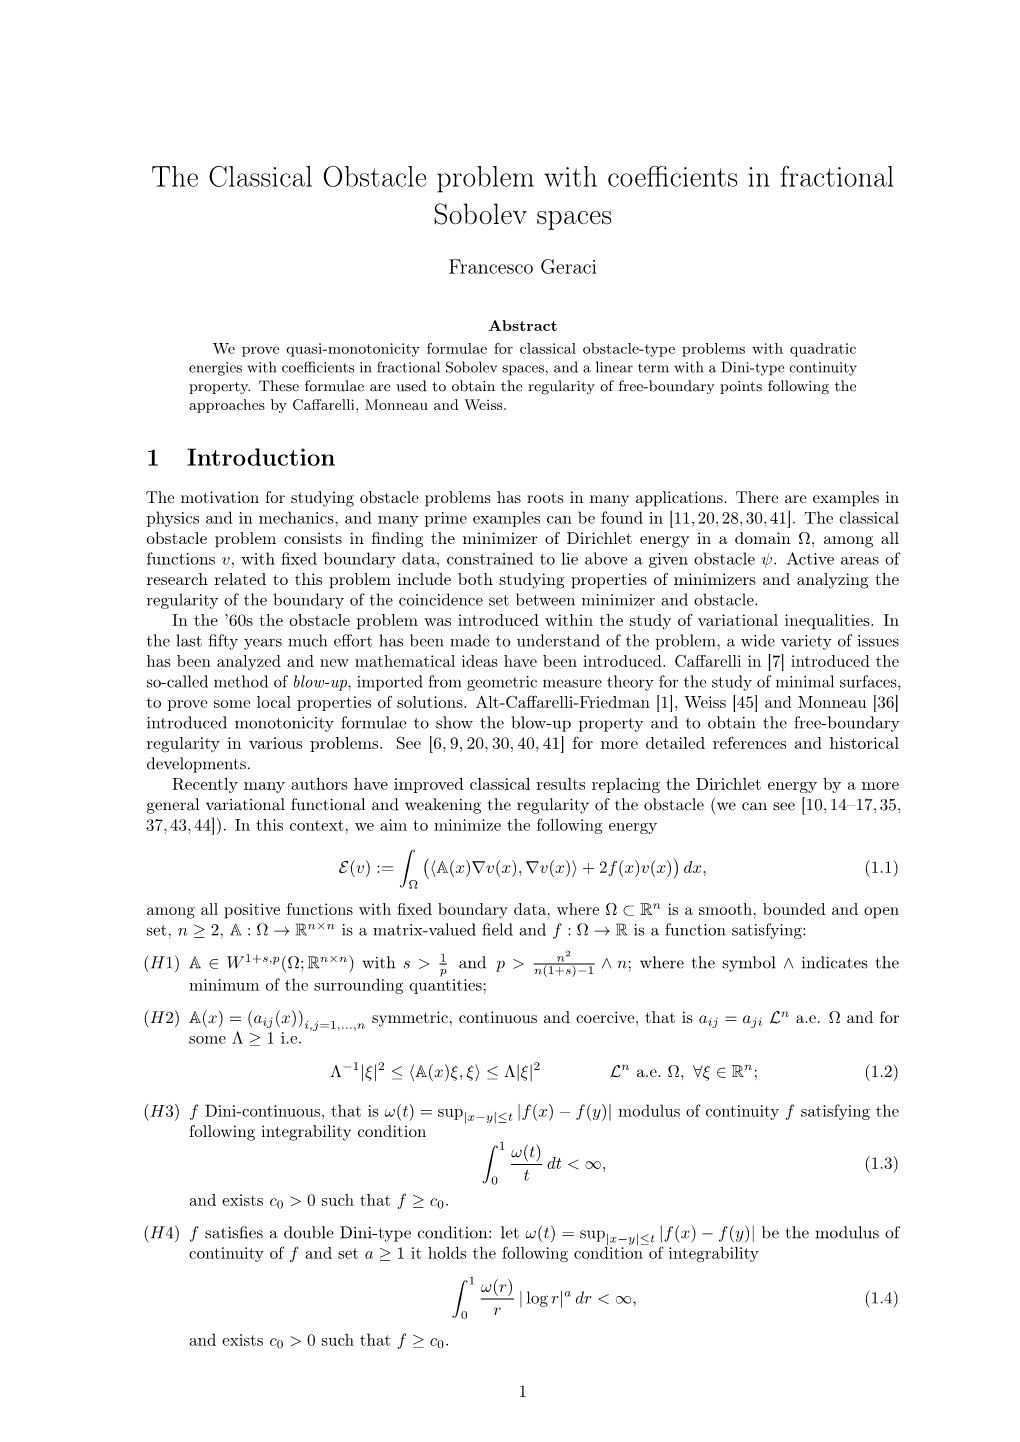 The Classical Obstacle Problem with Coefficients in Fractional Sobolev